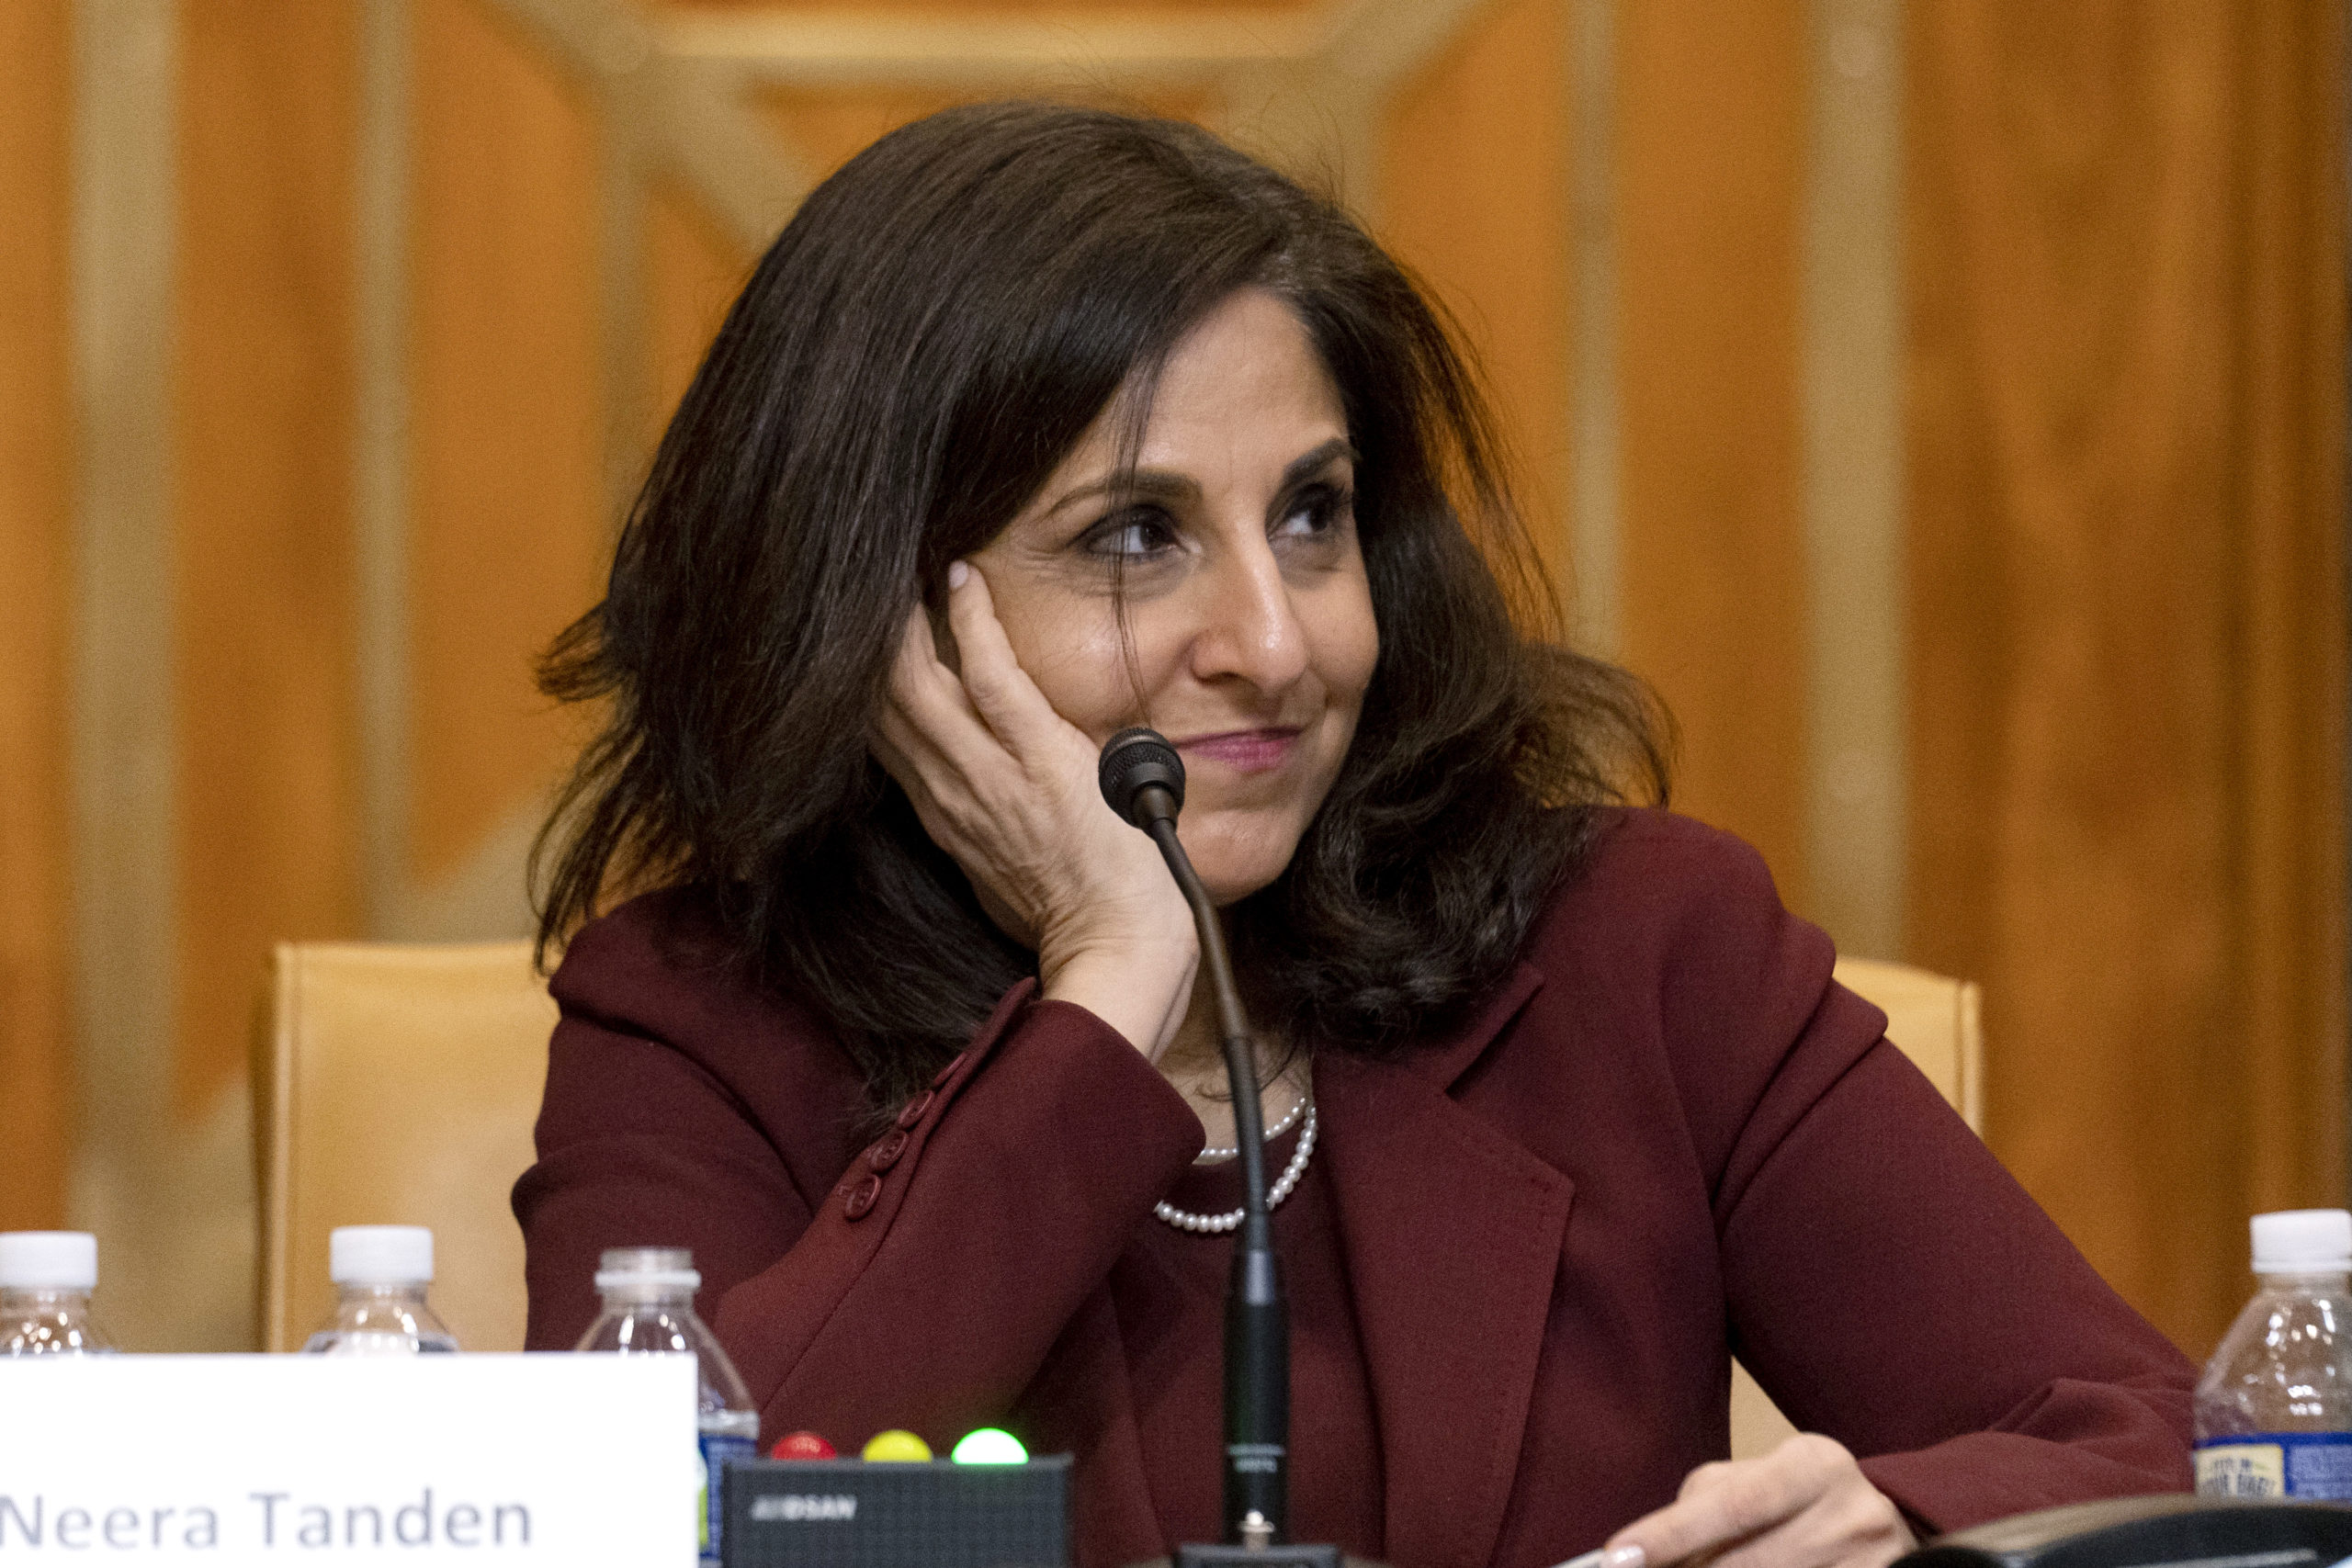 WASHINGTON, DC - FEBRUARY 10: Neera Tanden, President Joe Bidens nominee for Director of the Office of Management and Budget (OMB),appears before a Senate Committee on the Budget hearing on Capitol Hill on February 10, 2021 in Washington, DC. Tanden helped found the Center for American Progress, a policy research and advocacy organization and has held senior advisory positions in Democratic politics since the Clinton administration. (Photo by Andrew Harnik-Pool/Getty Images)